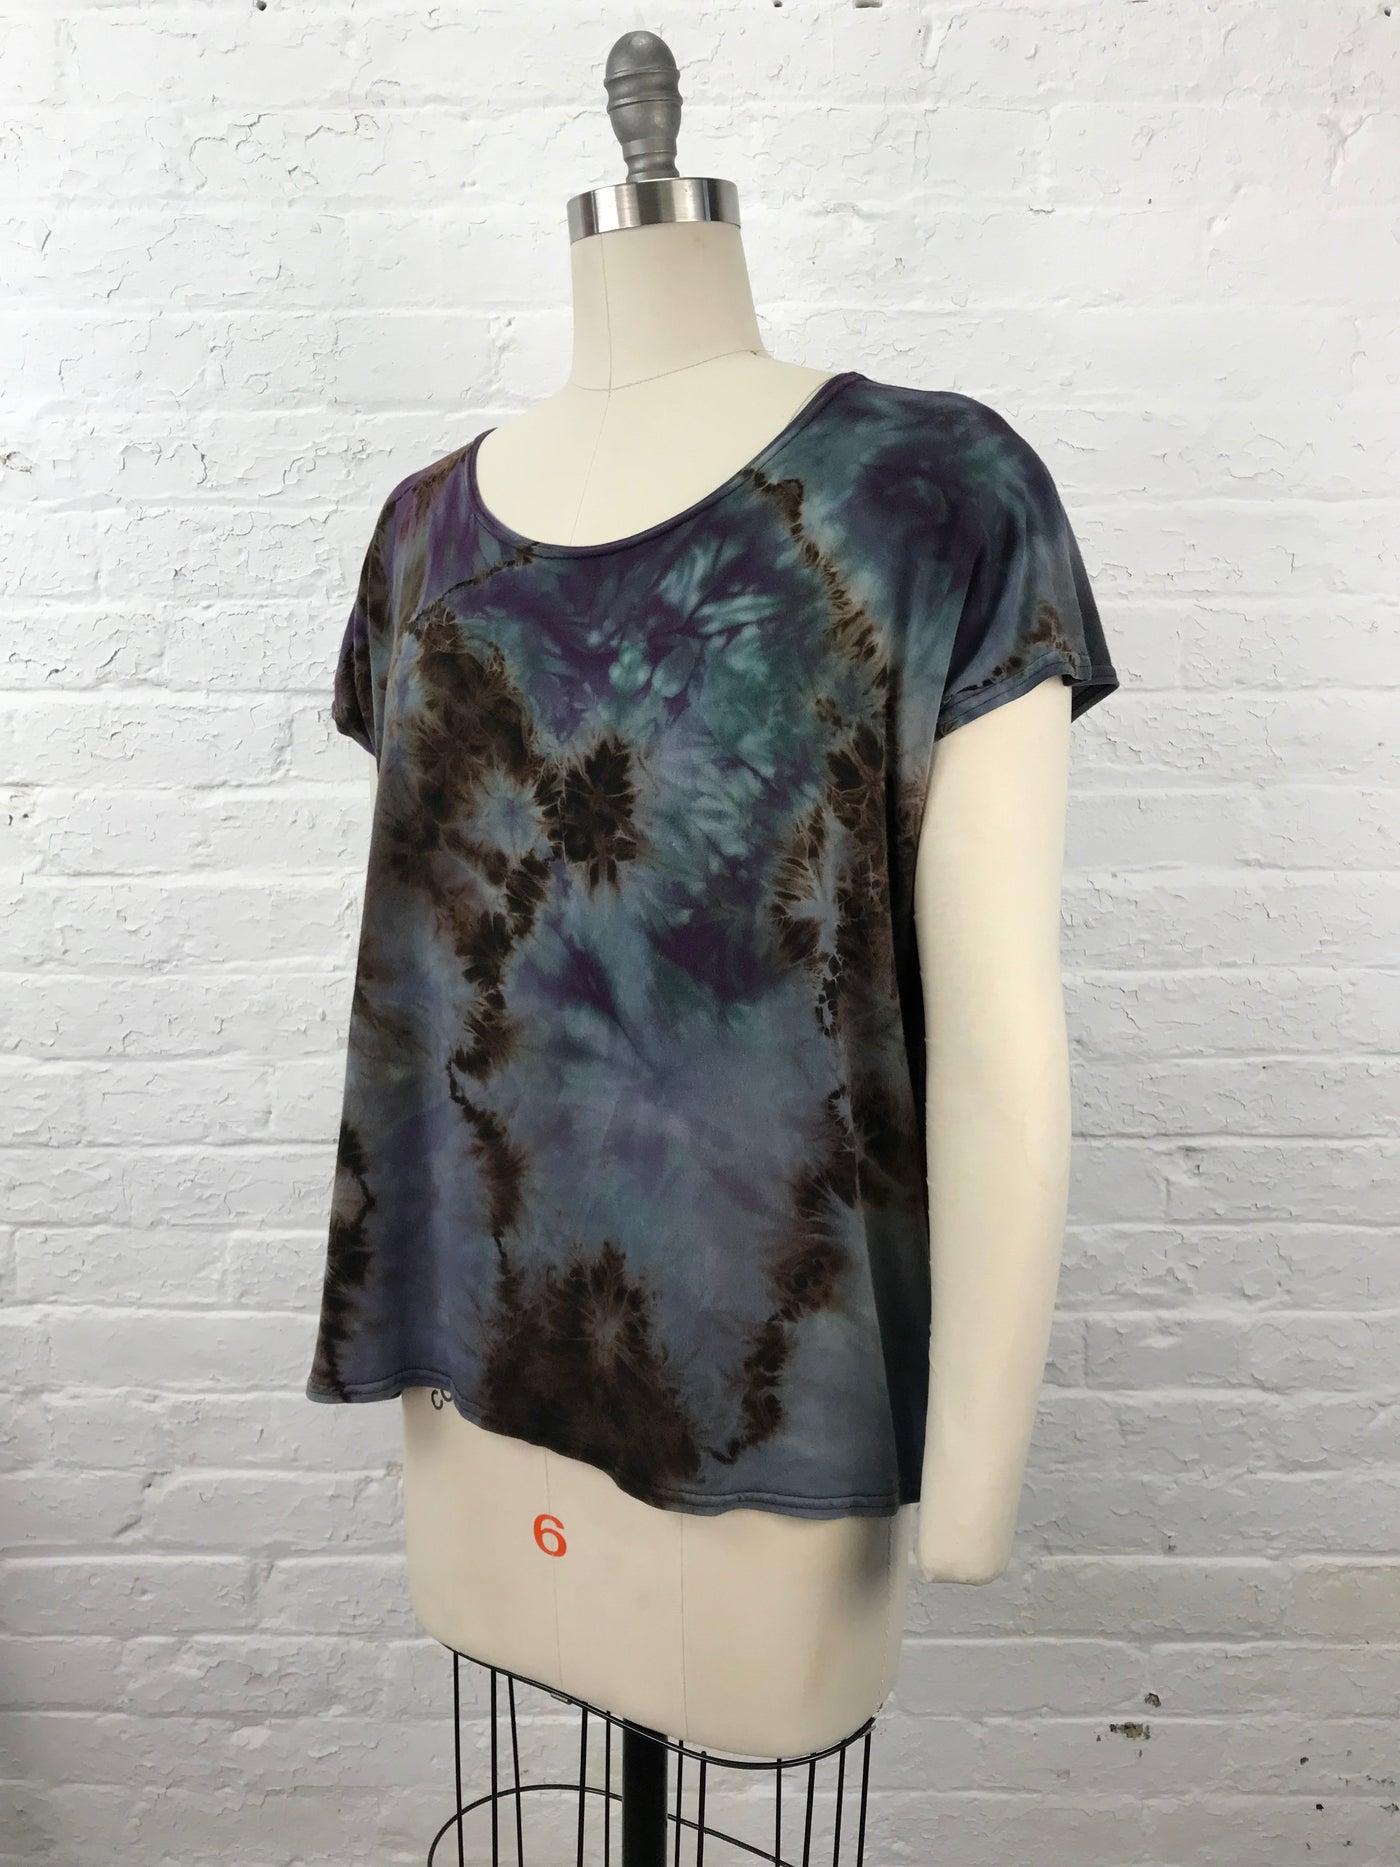 Elegant Shibori Dyed ELSIE TOP in Dark and Stormy Tangle - side view